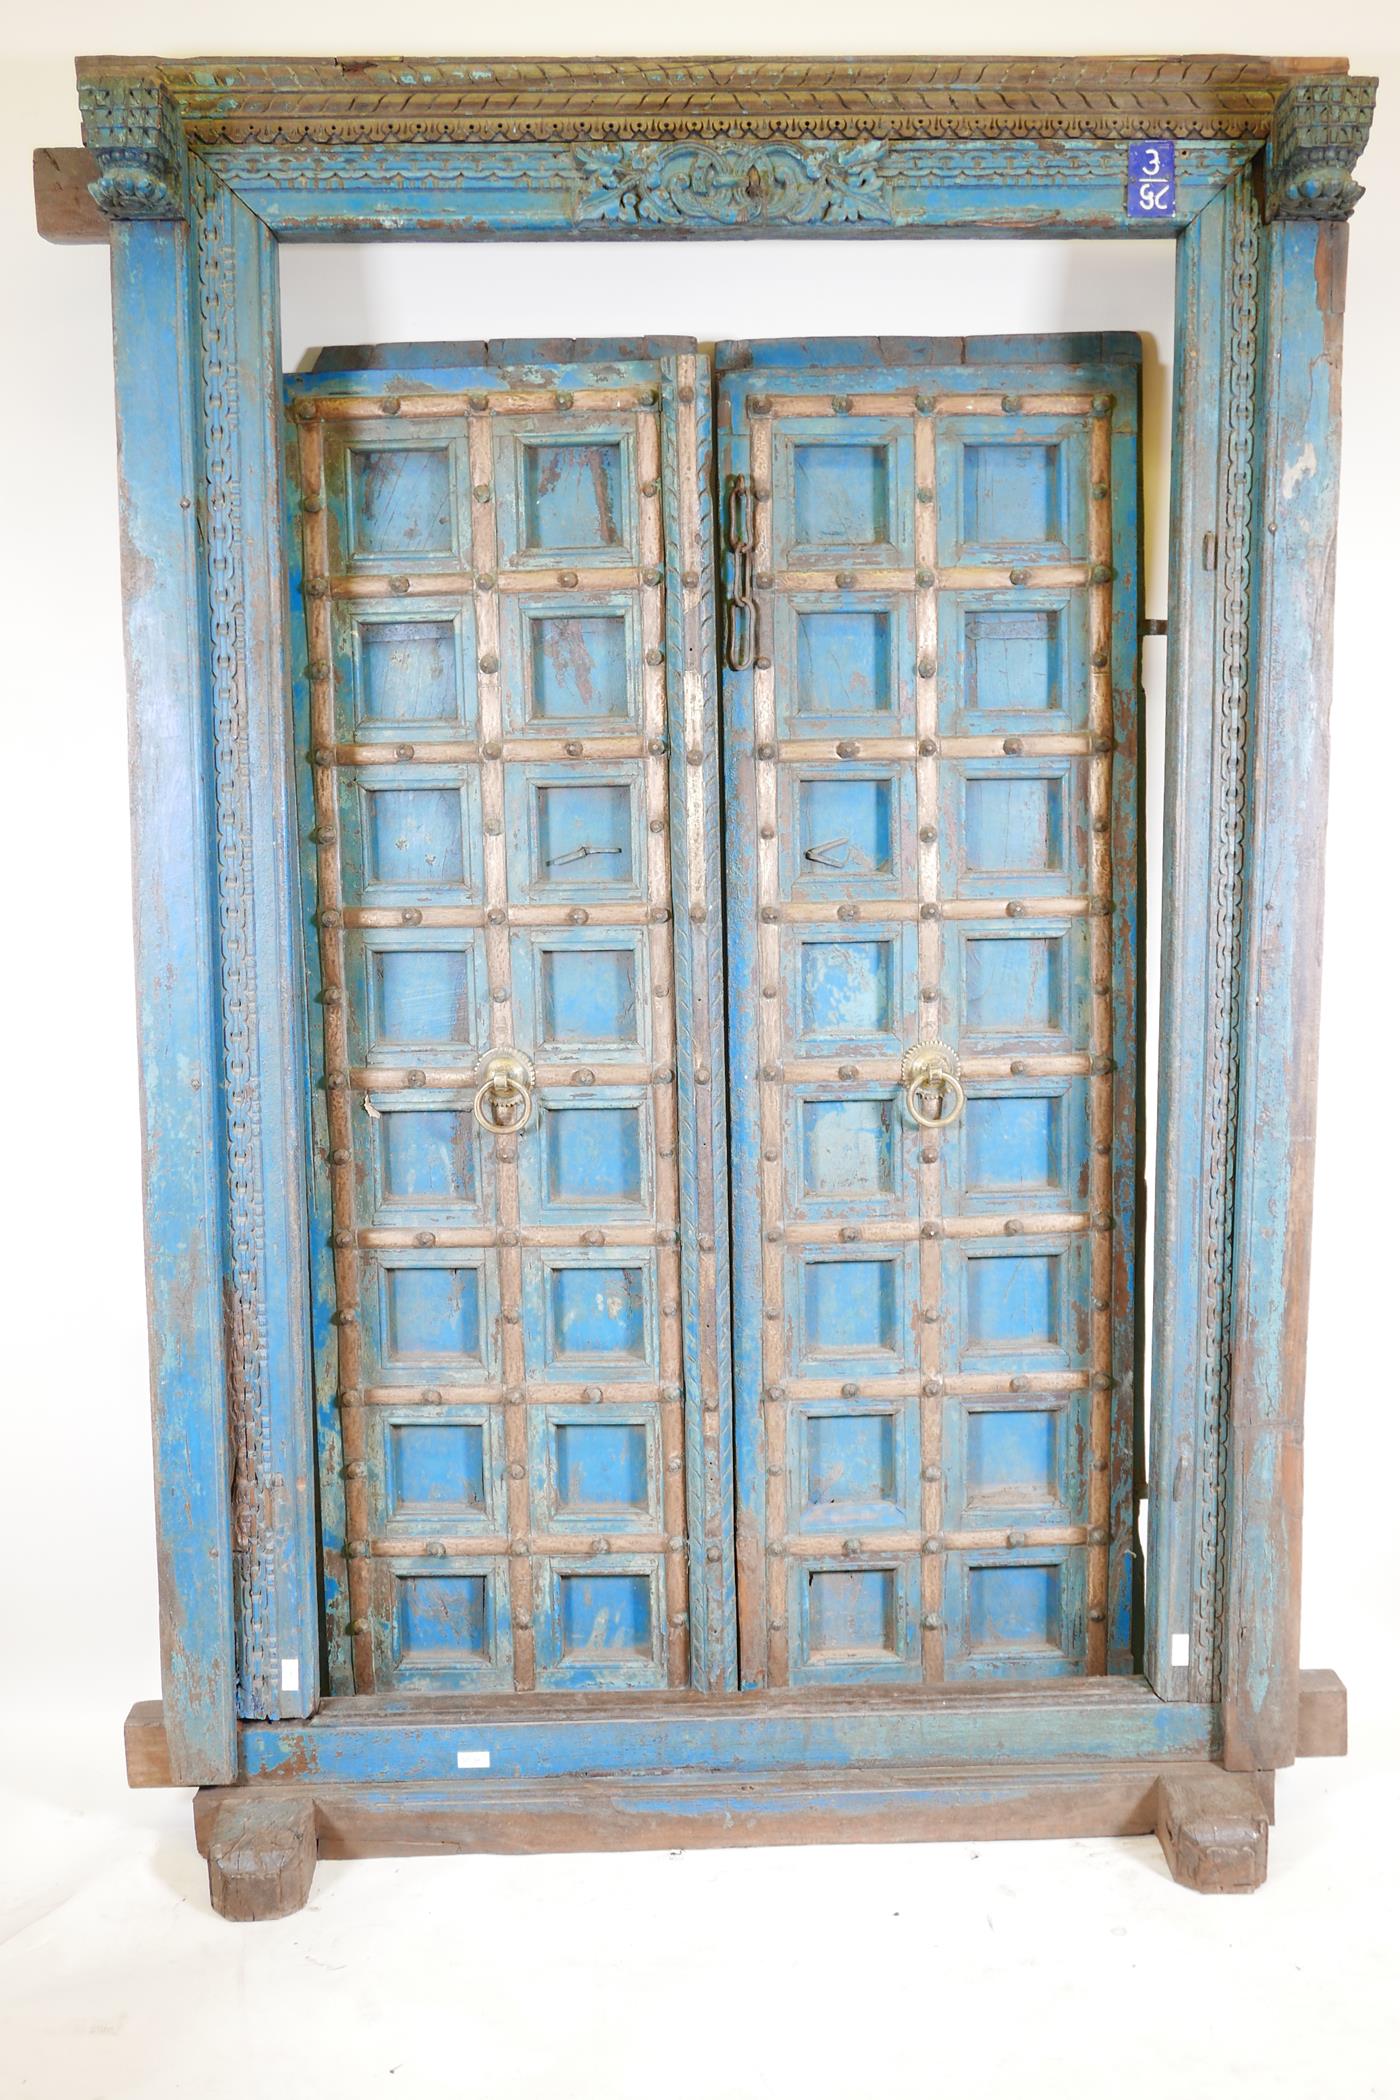 Architectural salvage: A pair of Indian hardwood panelled storm doors, with brass sheathed iron